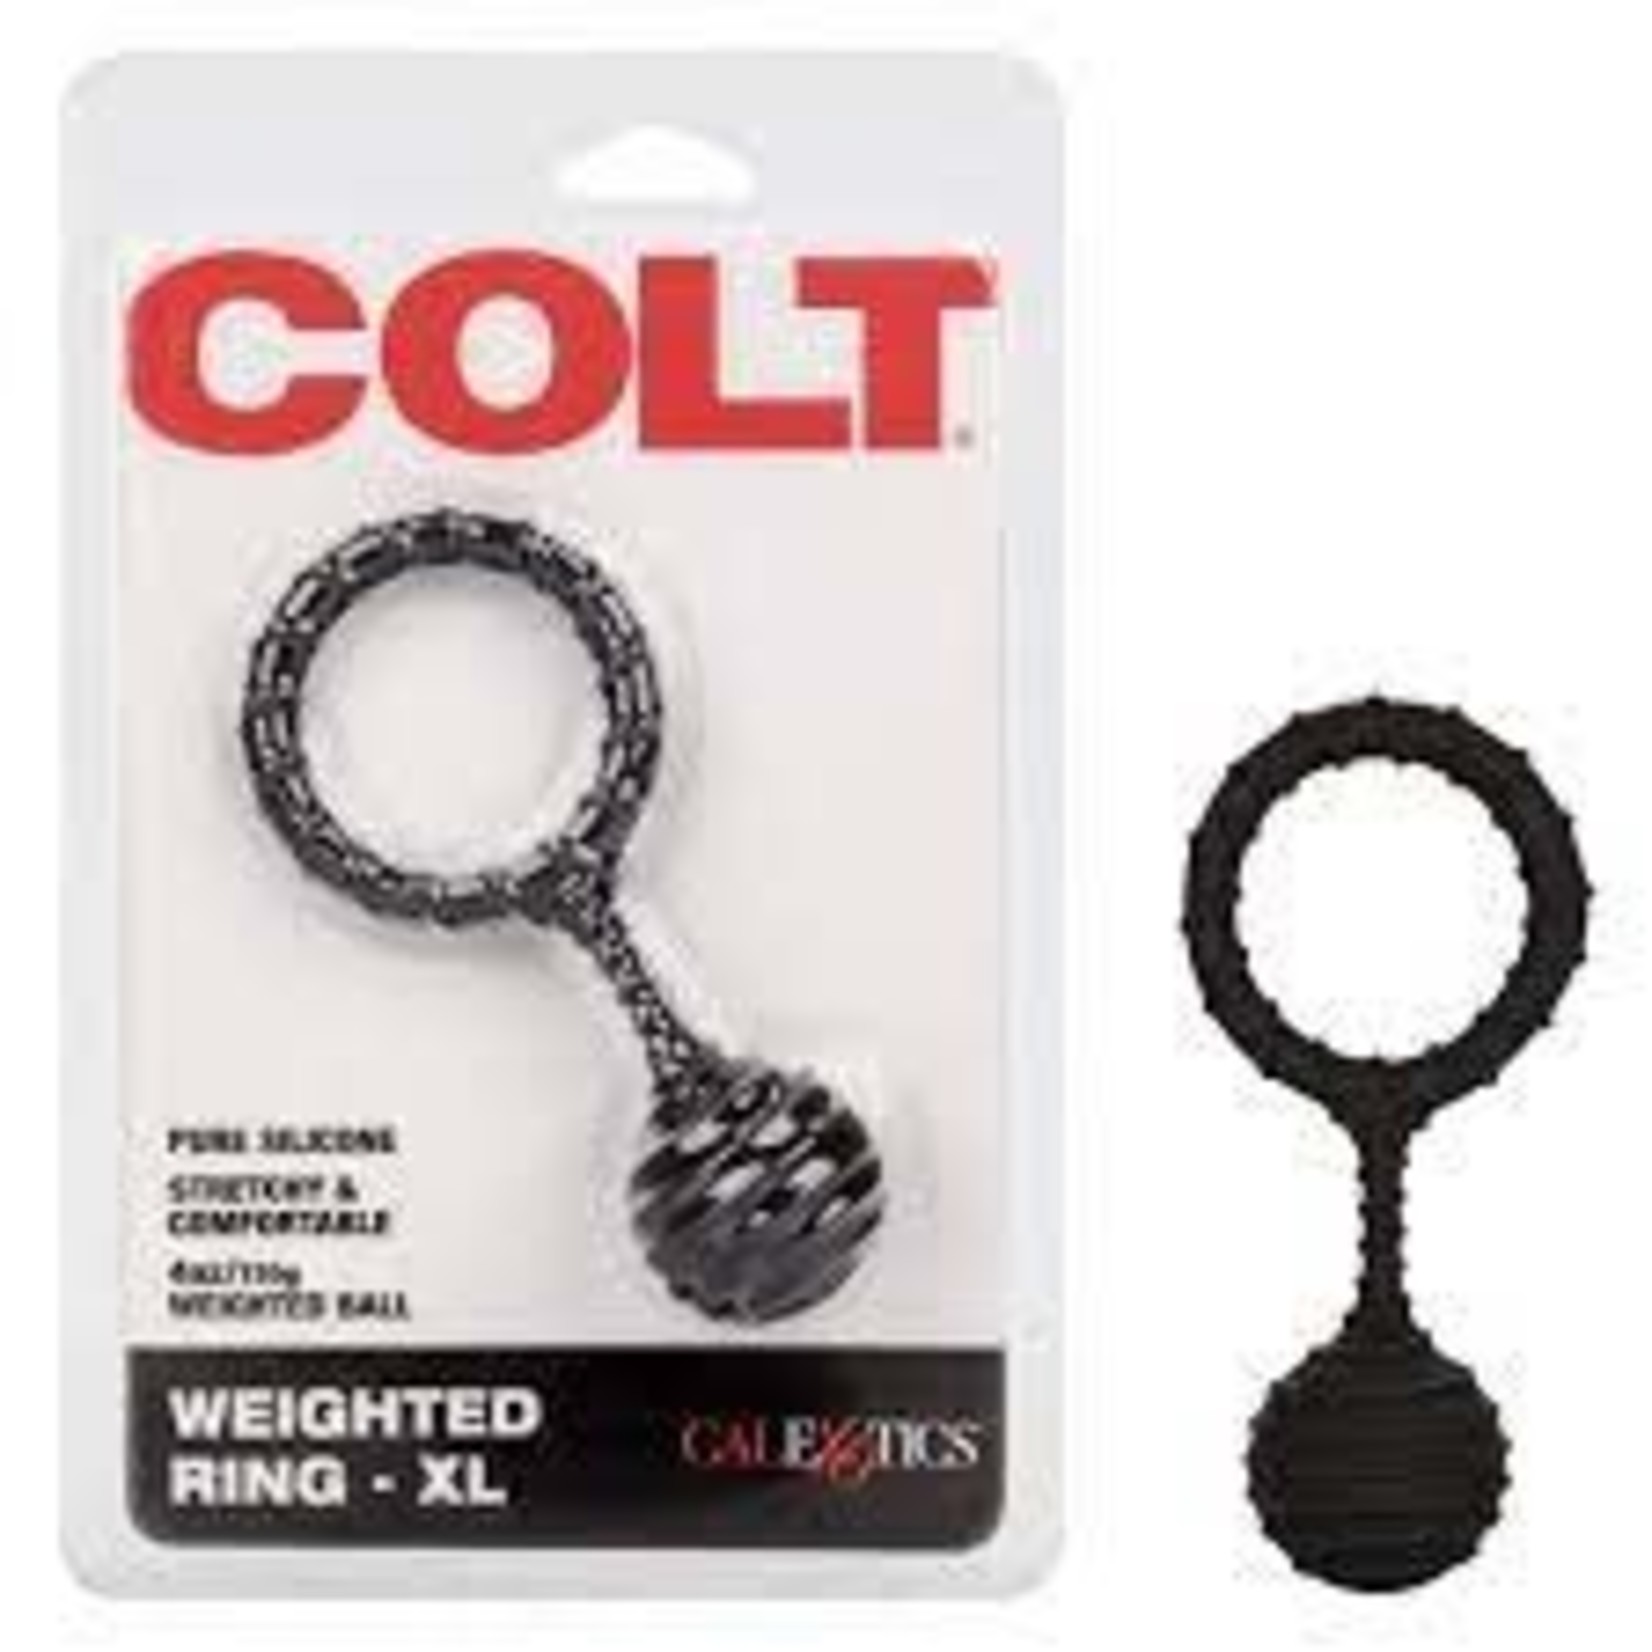 Colt Colt- 4 oz. Weighted Ring- XL